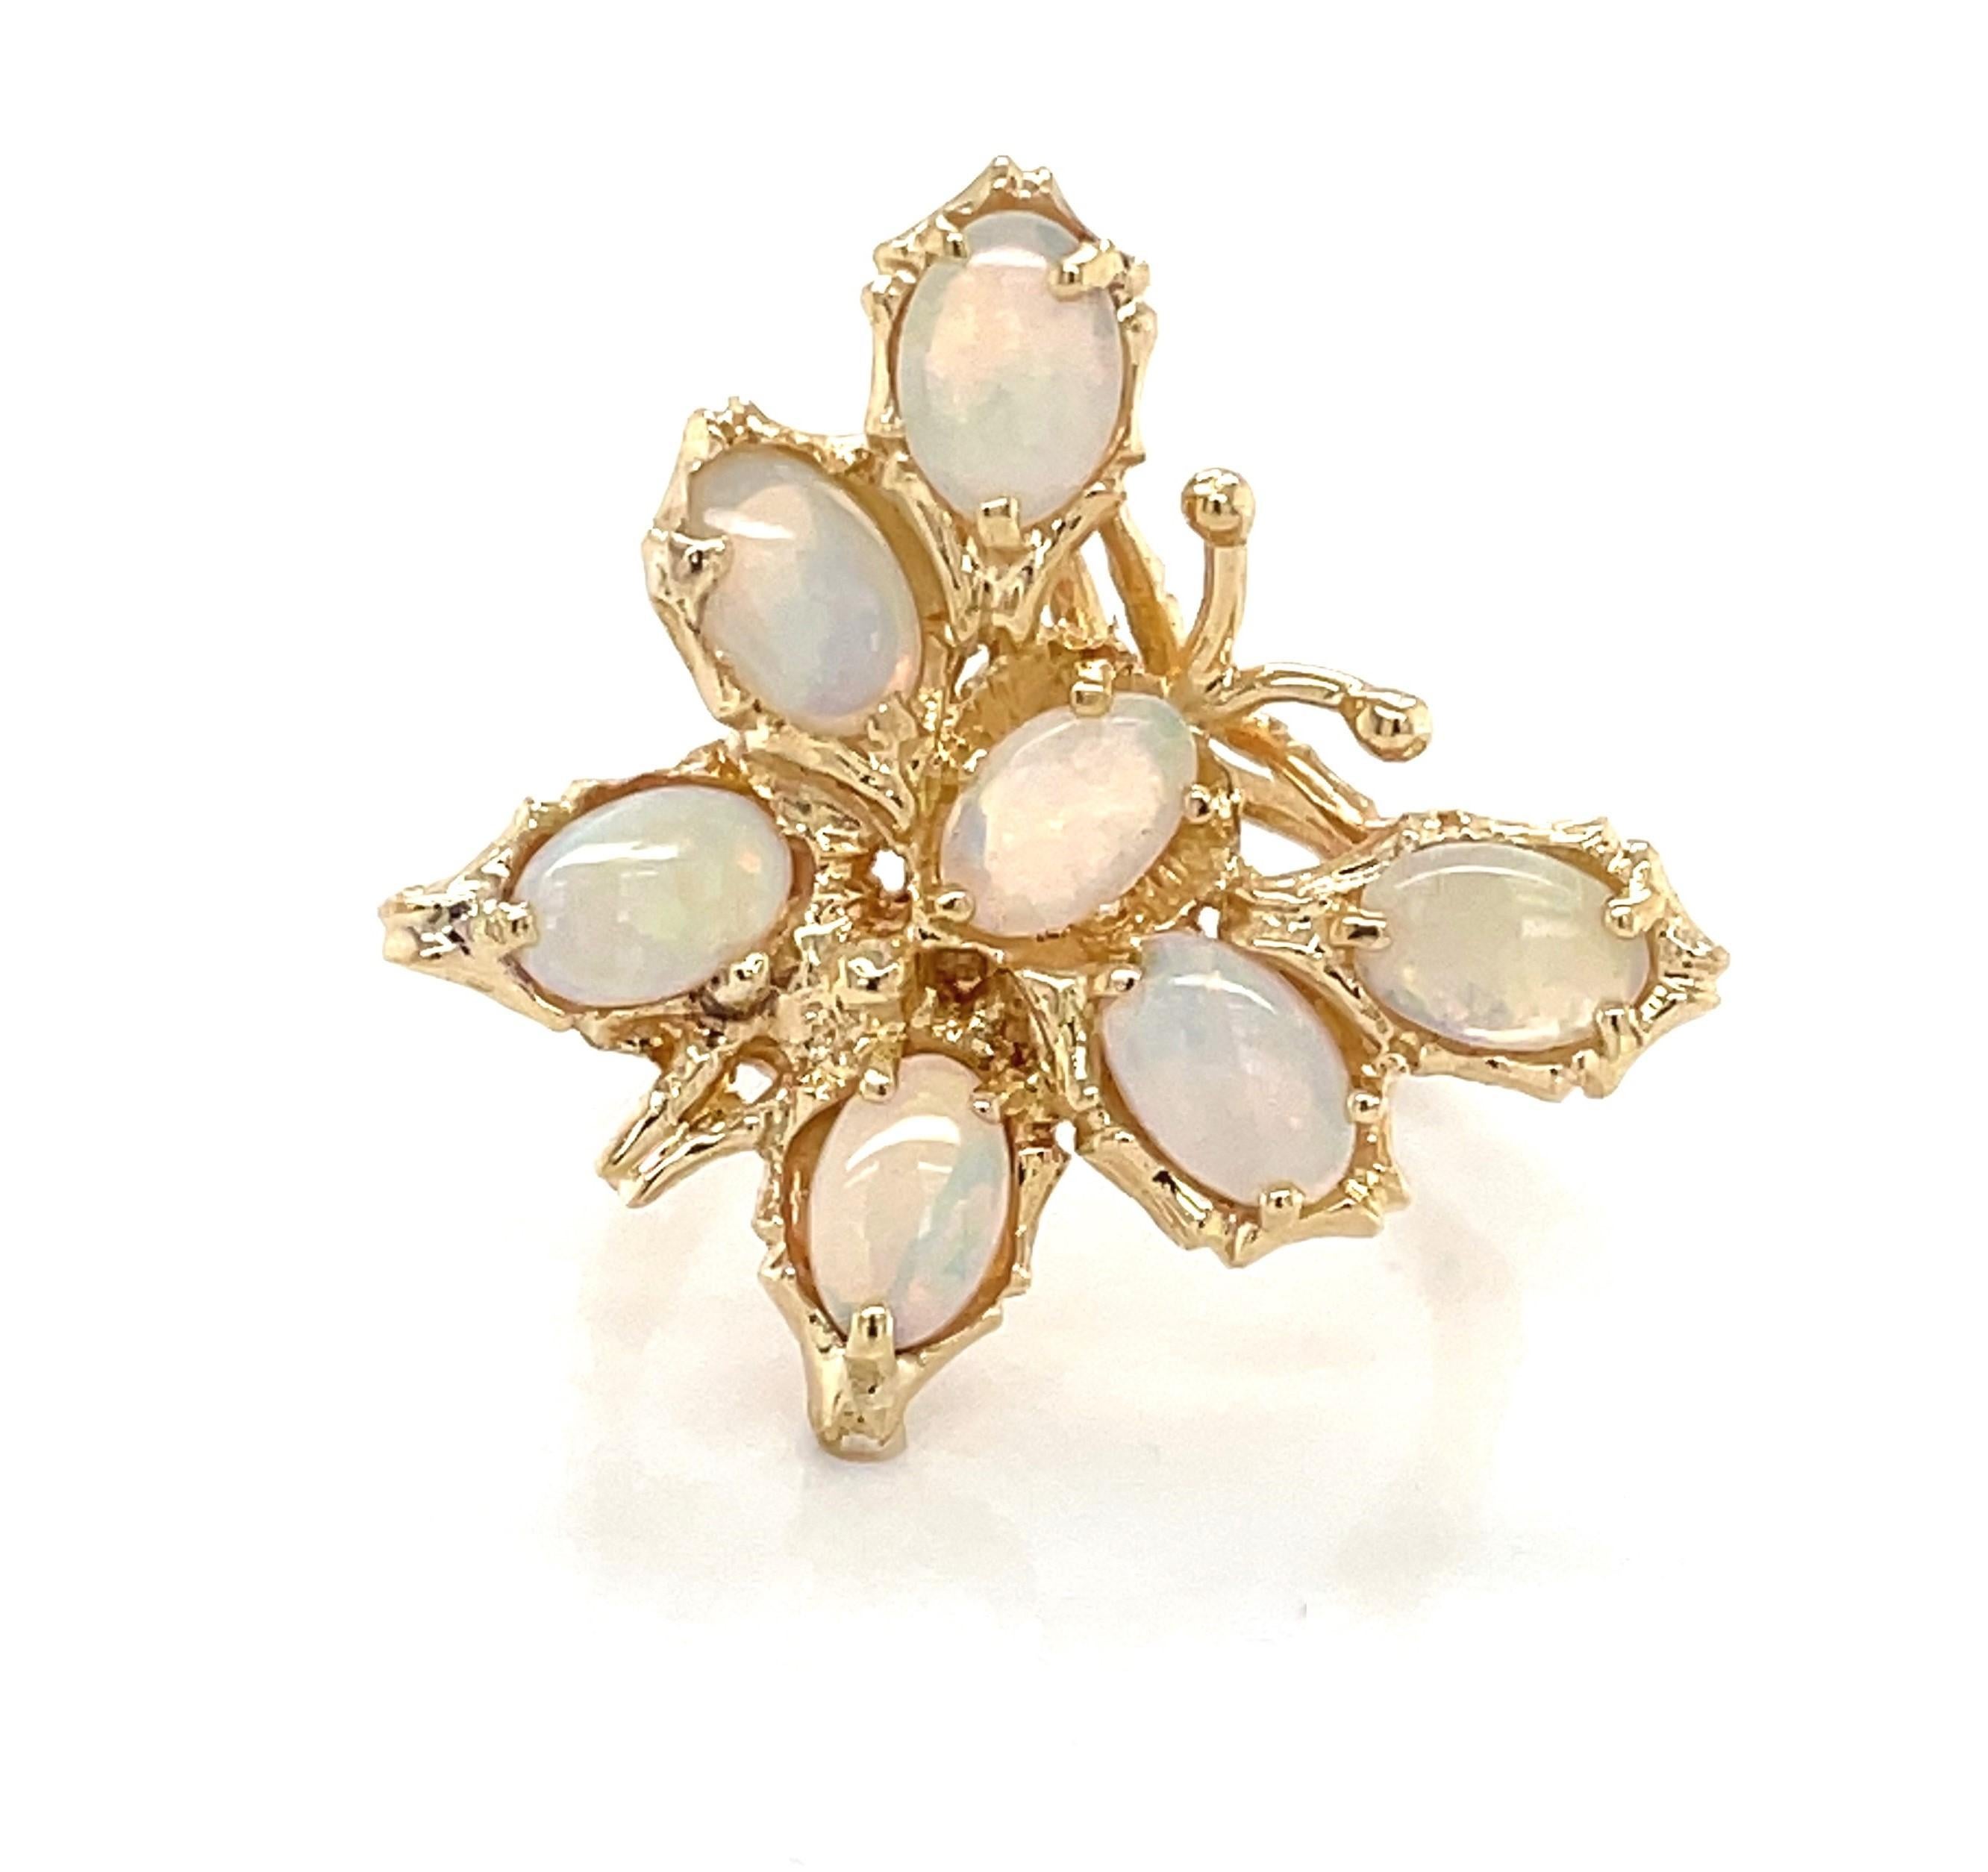 With wings of translucent opal, this whimsical butterfly ring in fourteen karat 14k yellow gold is a symbol of positivity and hope. Playfully set asymmetrically as if the butterfly was in flight, the ring is constructed with open gallery which gives